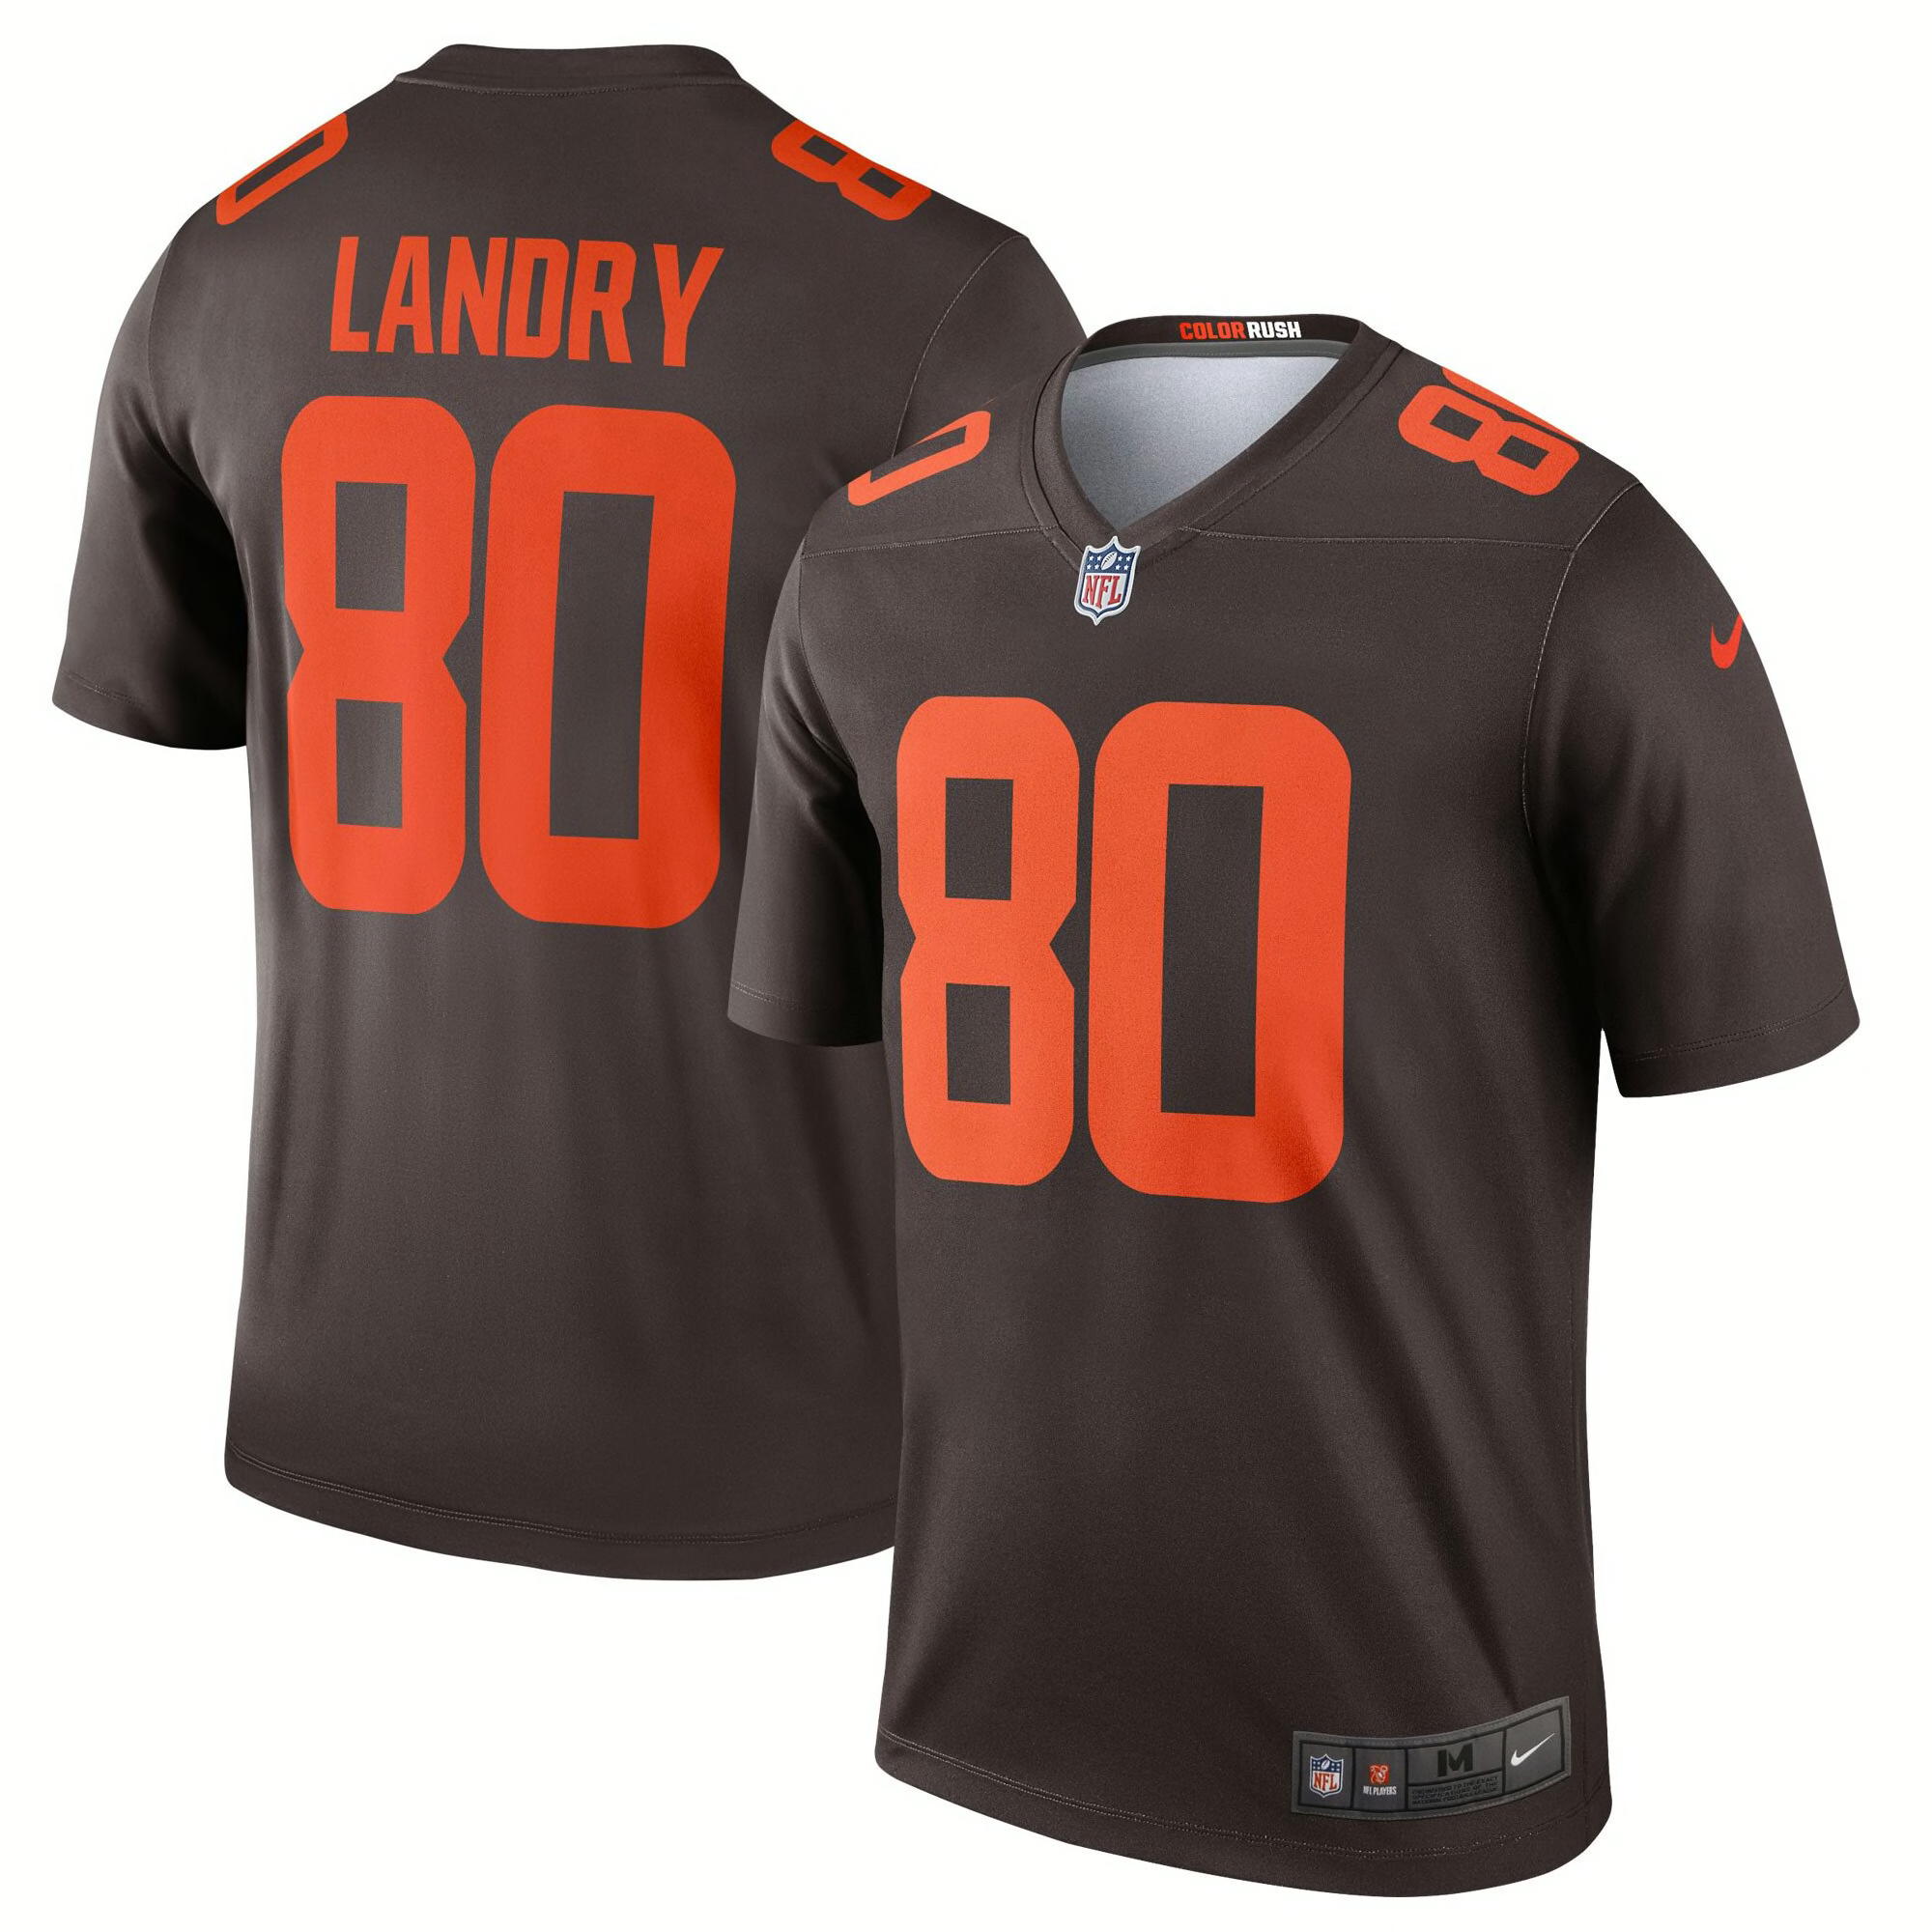 browns inverted jersey